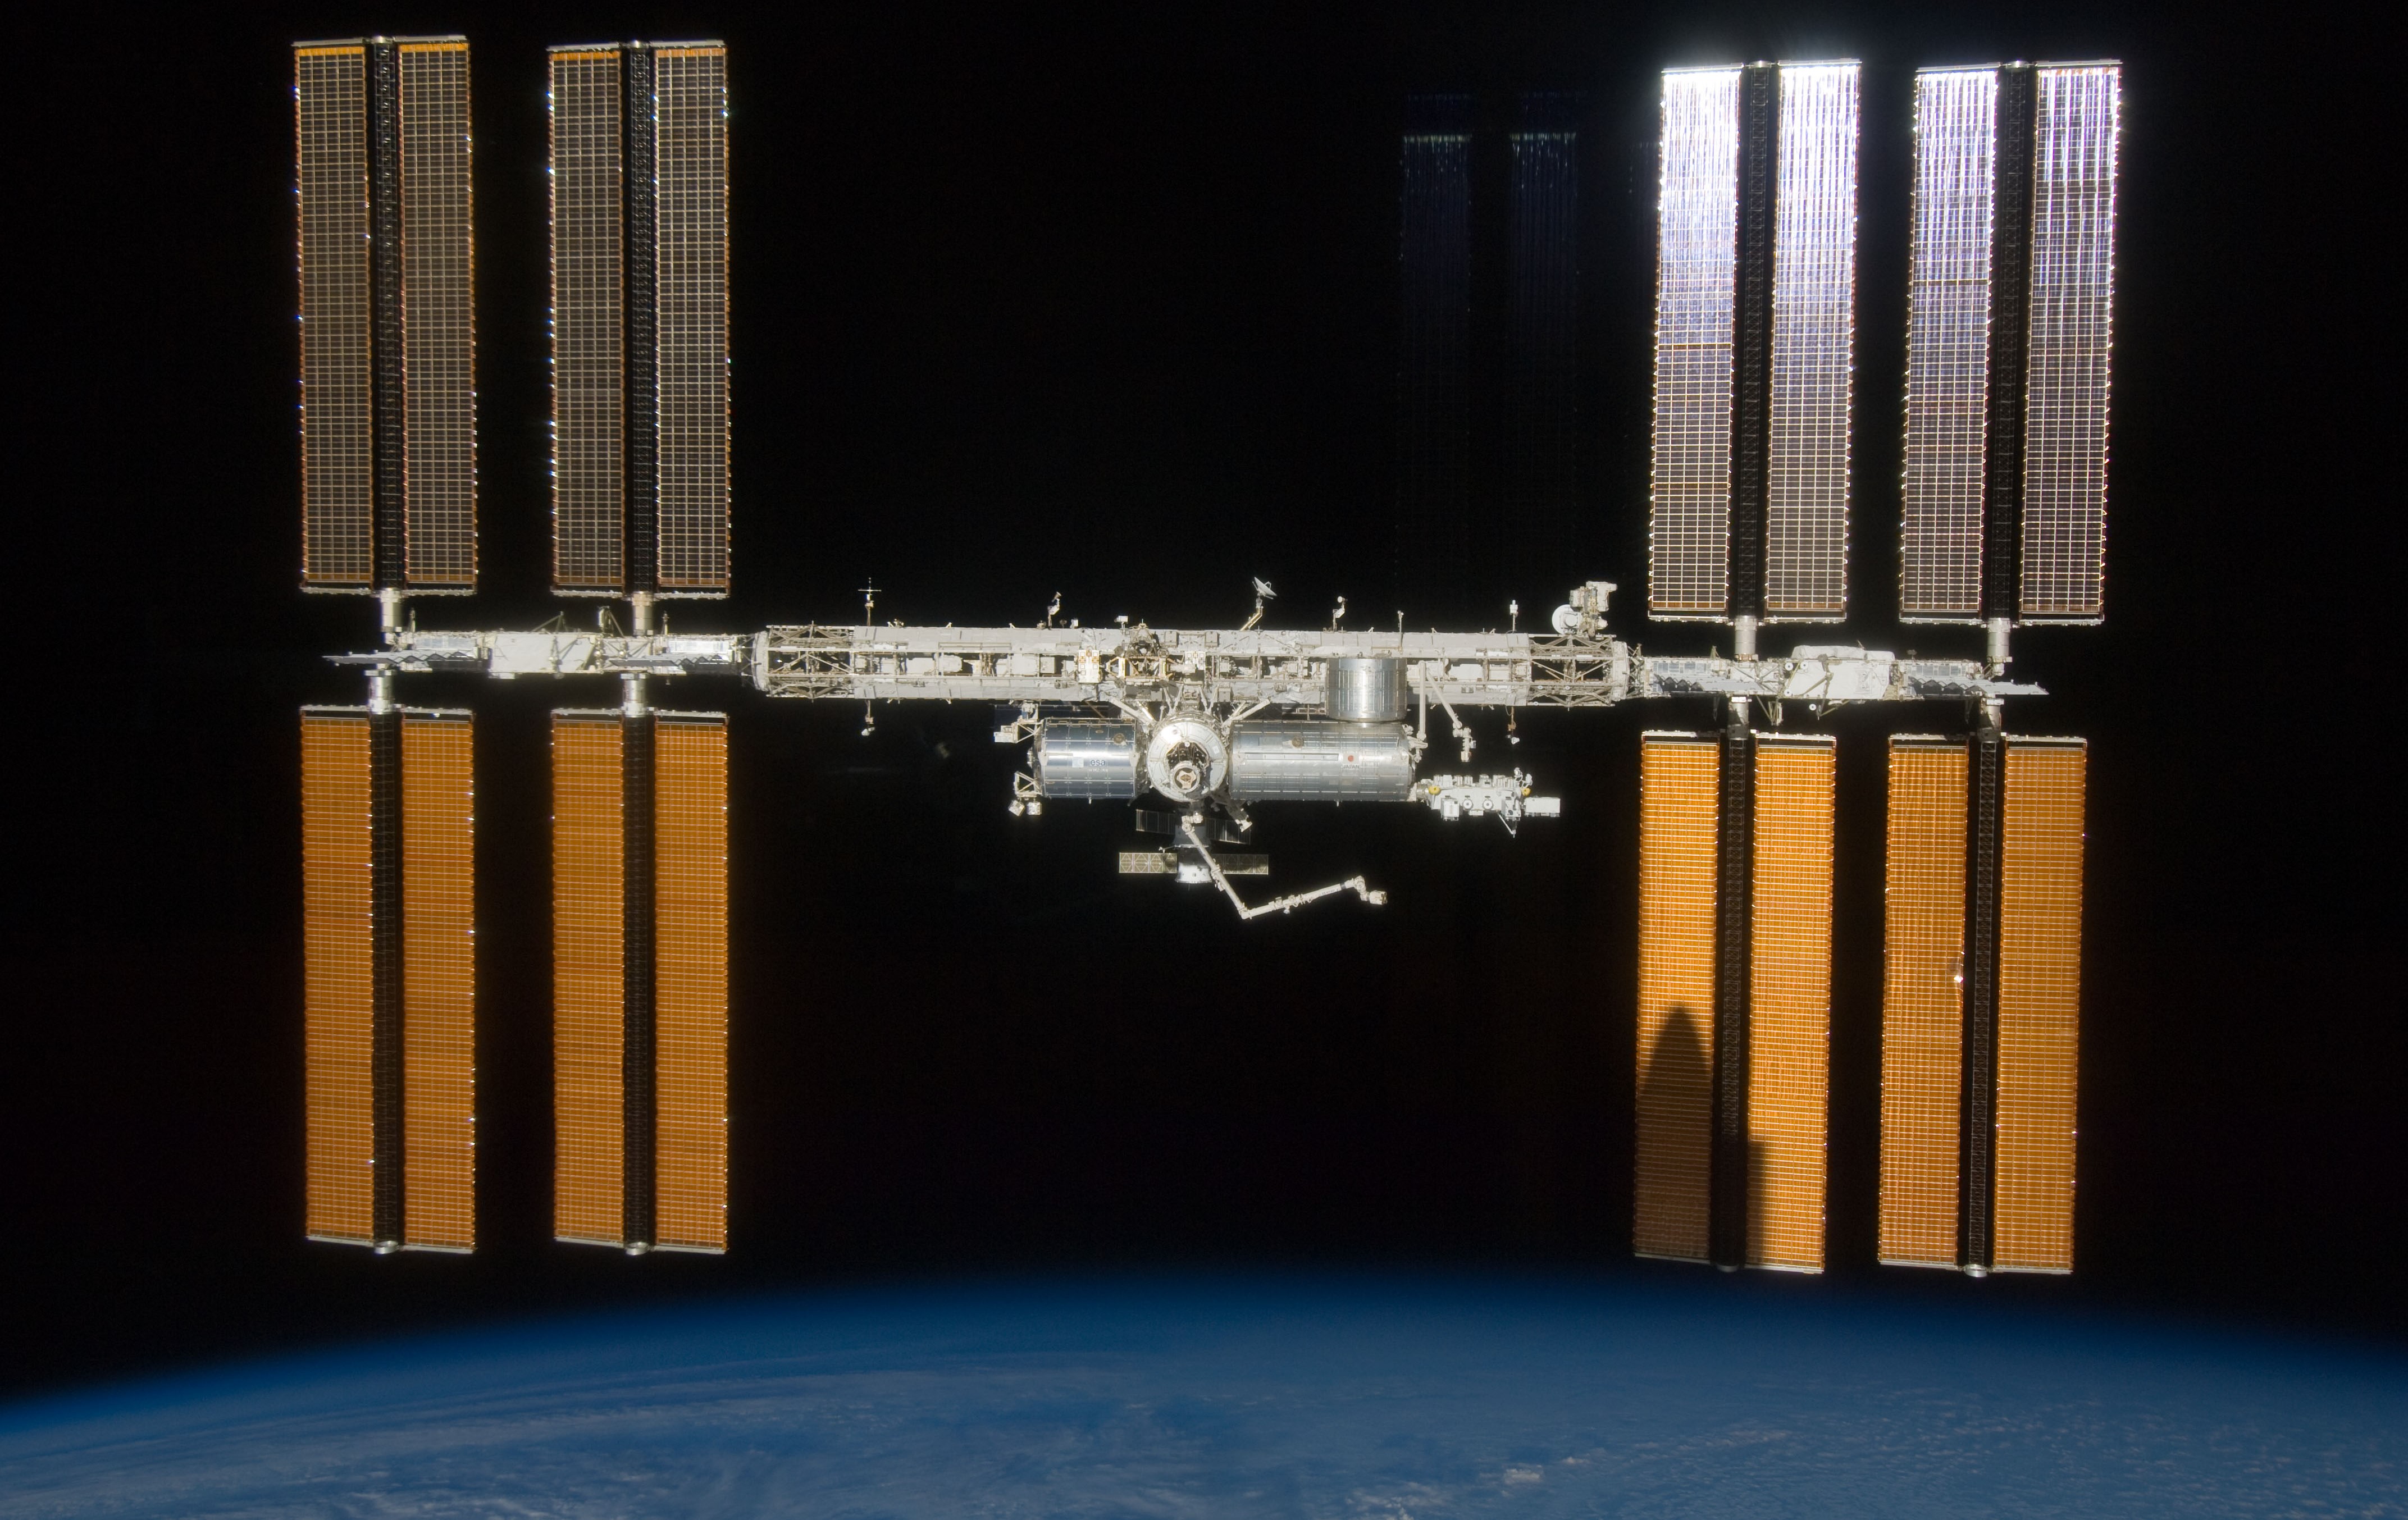 The International Space Station, with the newly added Exposed Facility and its first payloads, as seen from Endeavour during the departure flyaround. Endeavour casts its shadow on the solar arrays